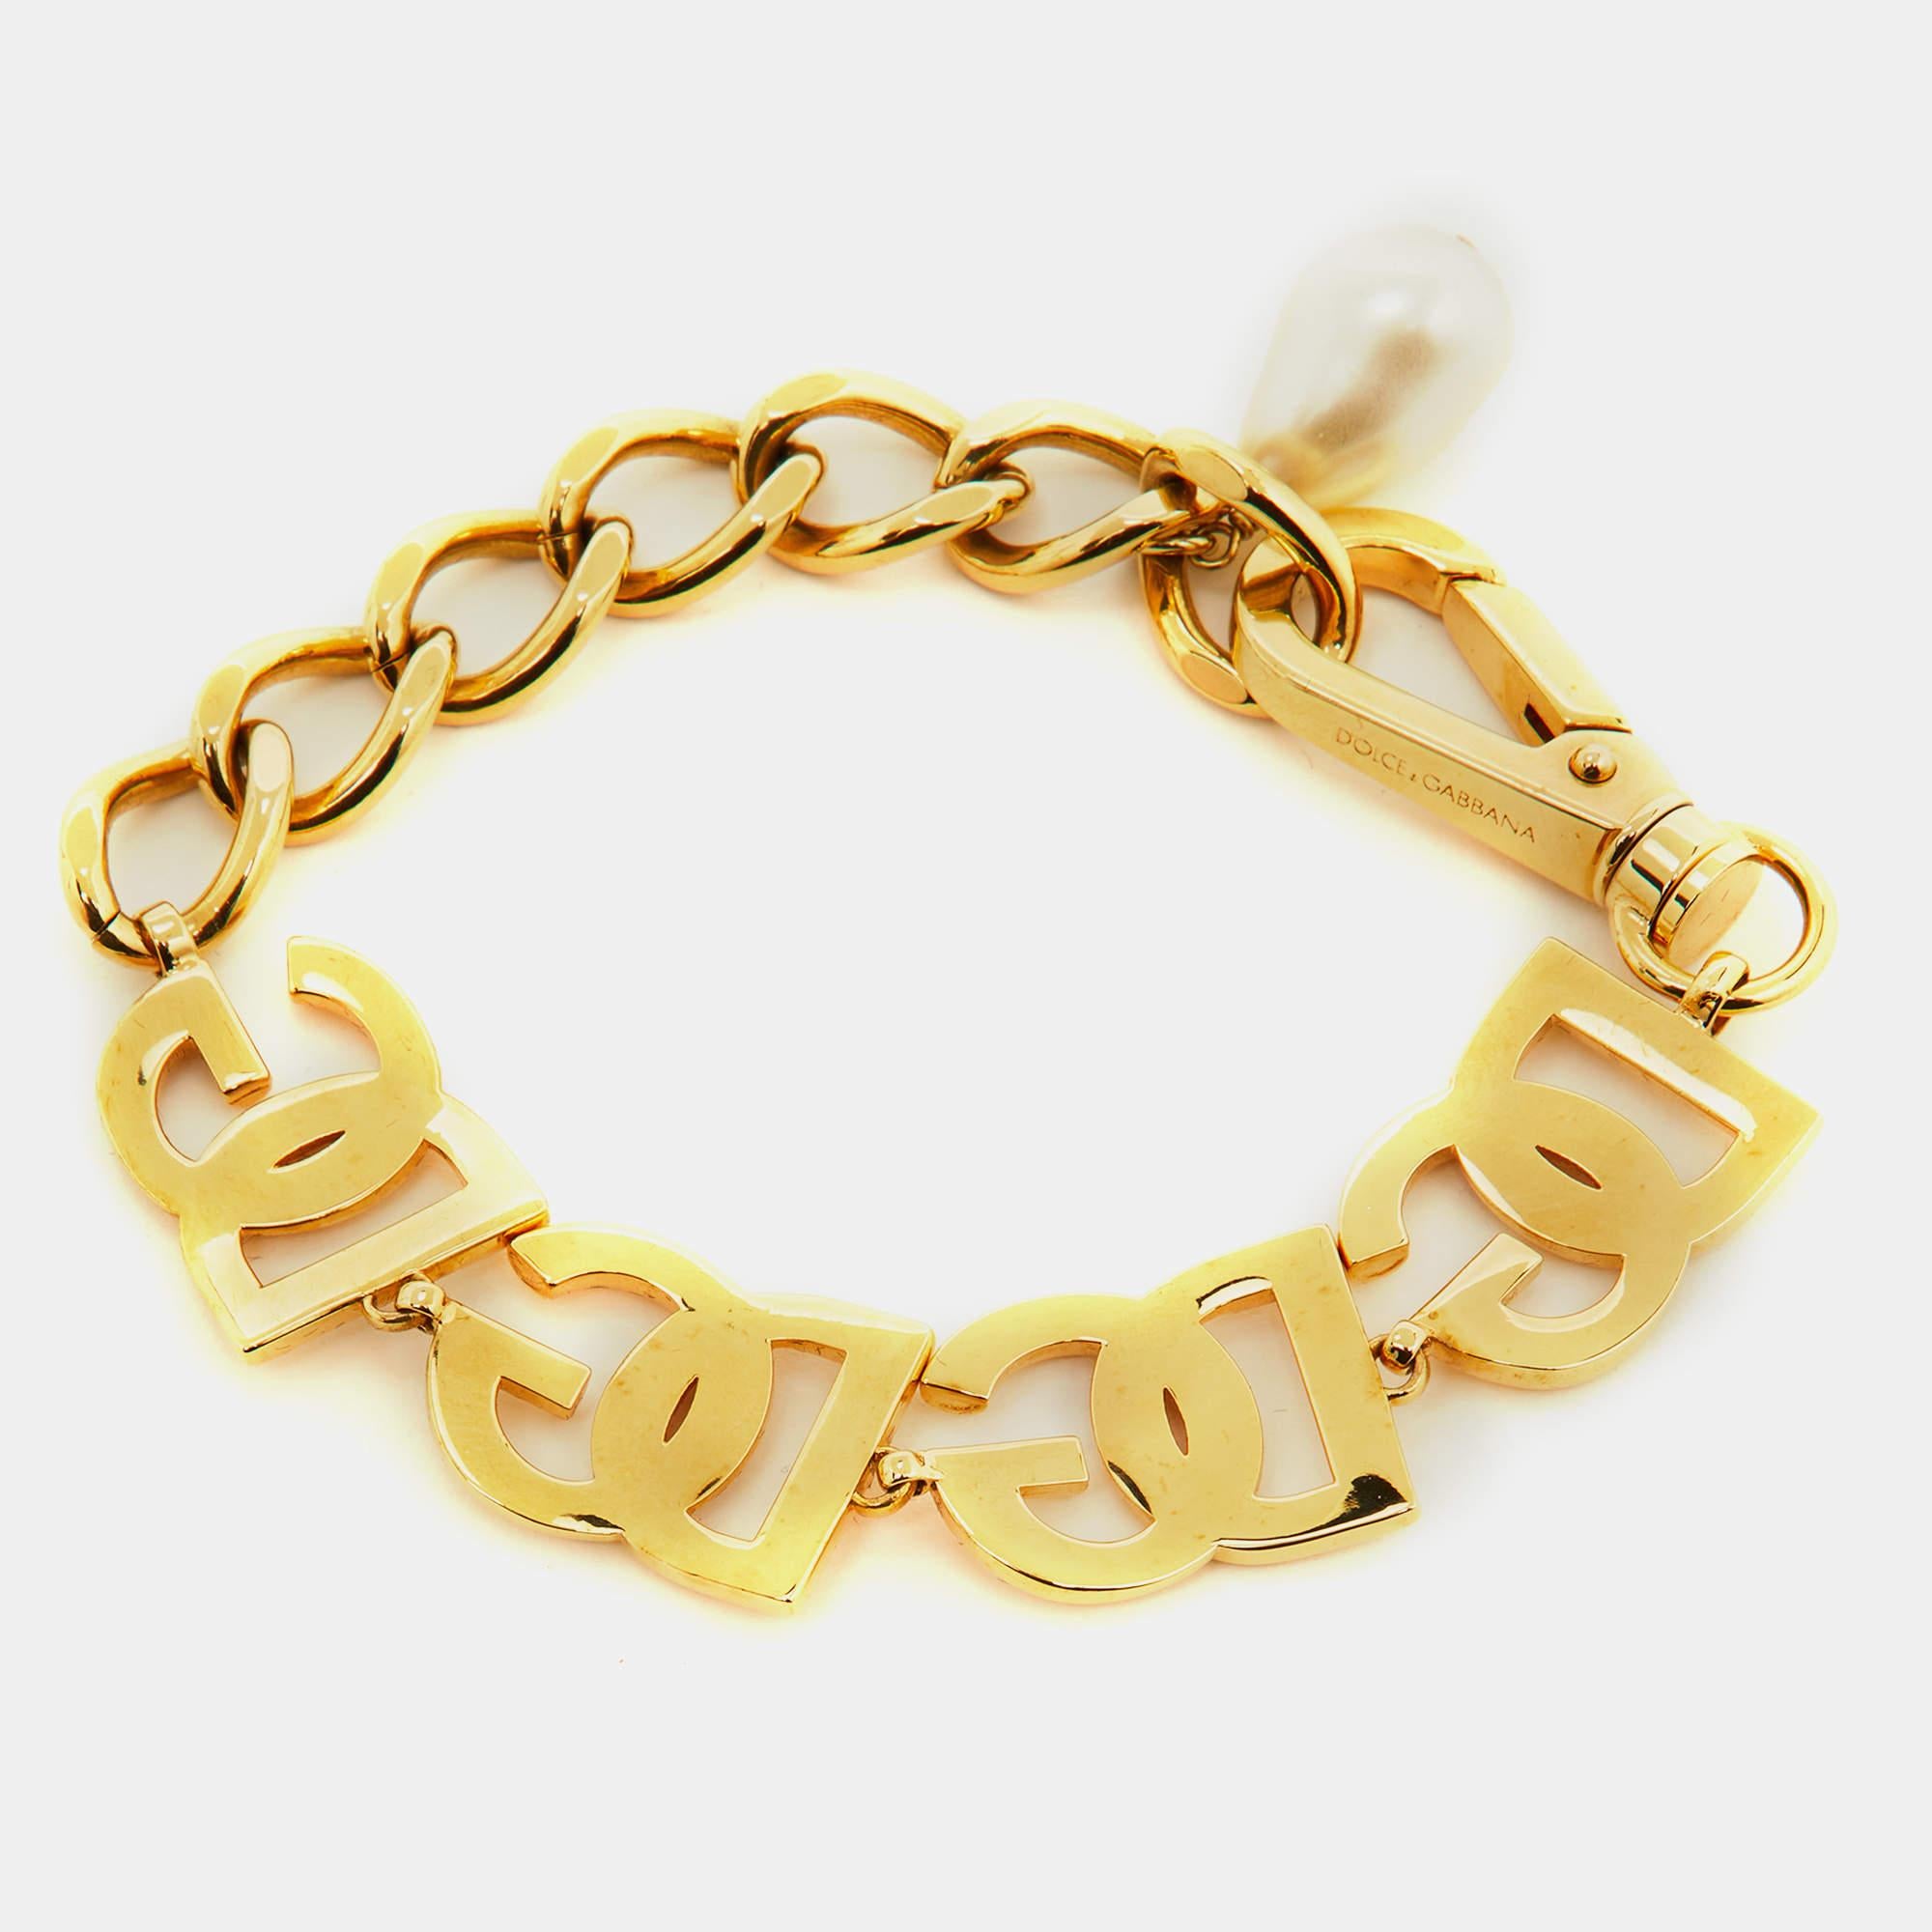 This classy Dolce & Gabbana bracelet can be worn over and over again once purchased. It will never go out of style. Constructed using gold-tone metal, this bangle is beautified with the DG logo.

